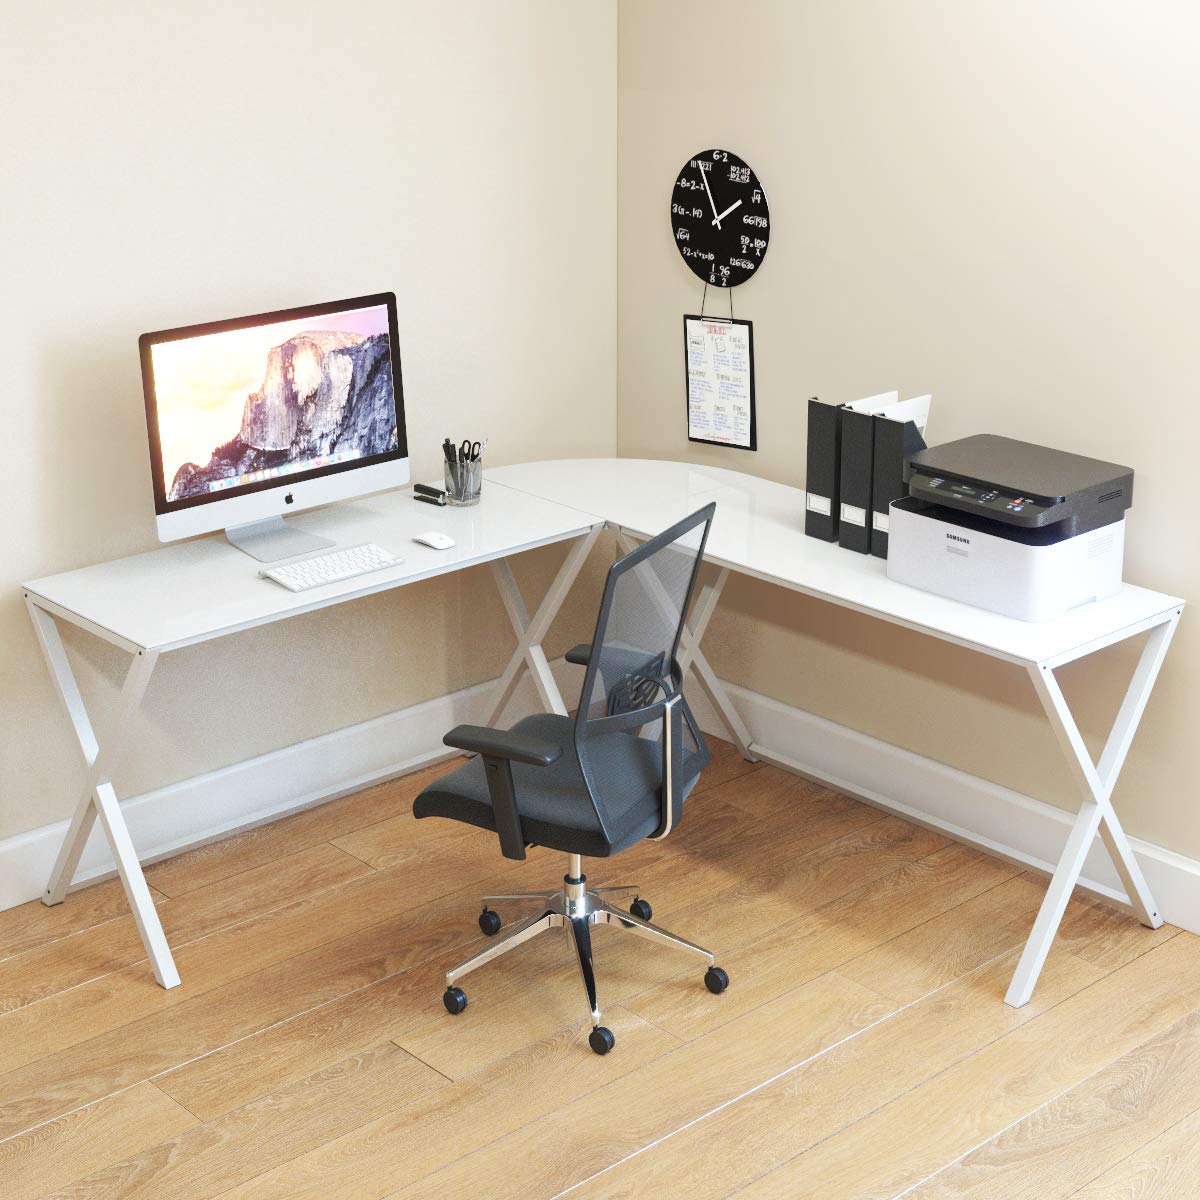 Rr1080 51 X 51 X 29 In. Keeling L Shaped Computer Desk, White Frame & White Glass - 3 Piece